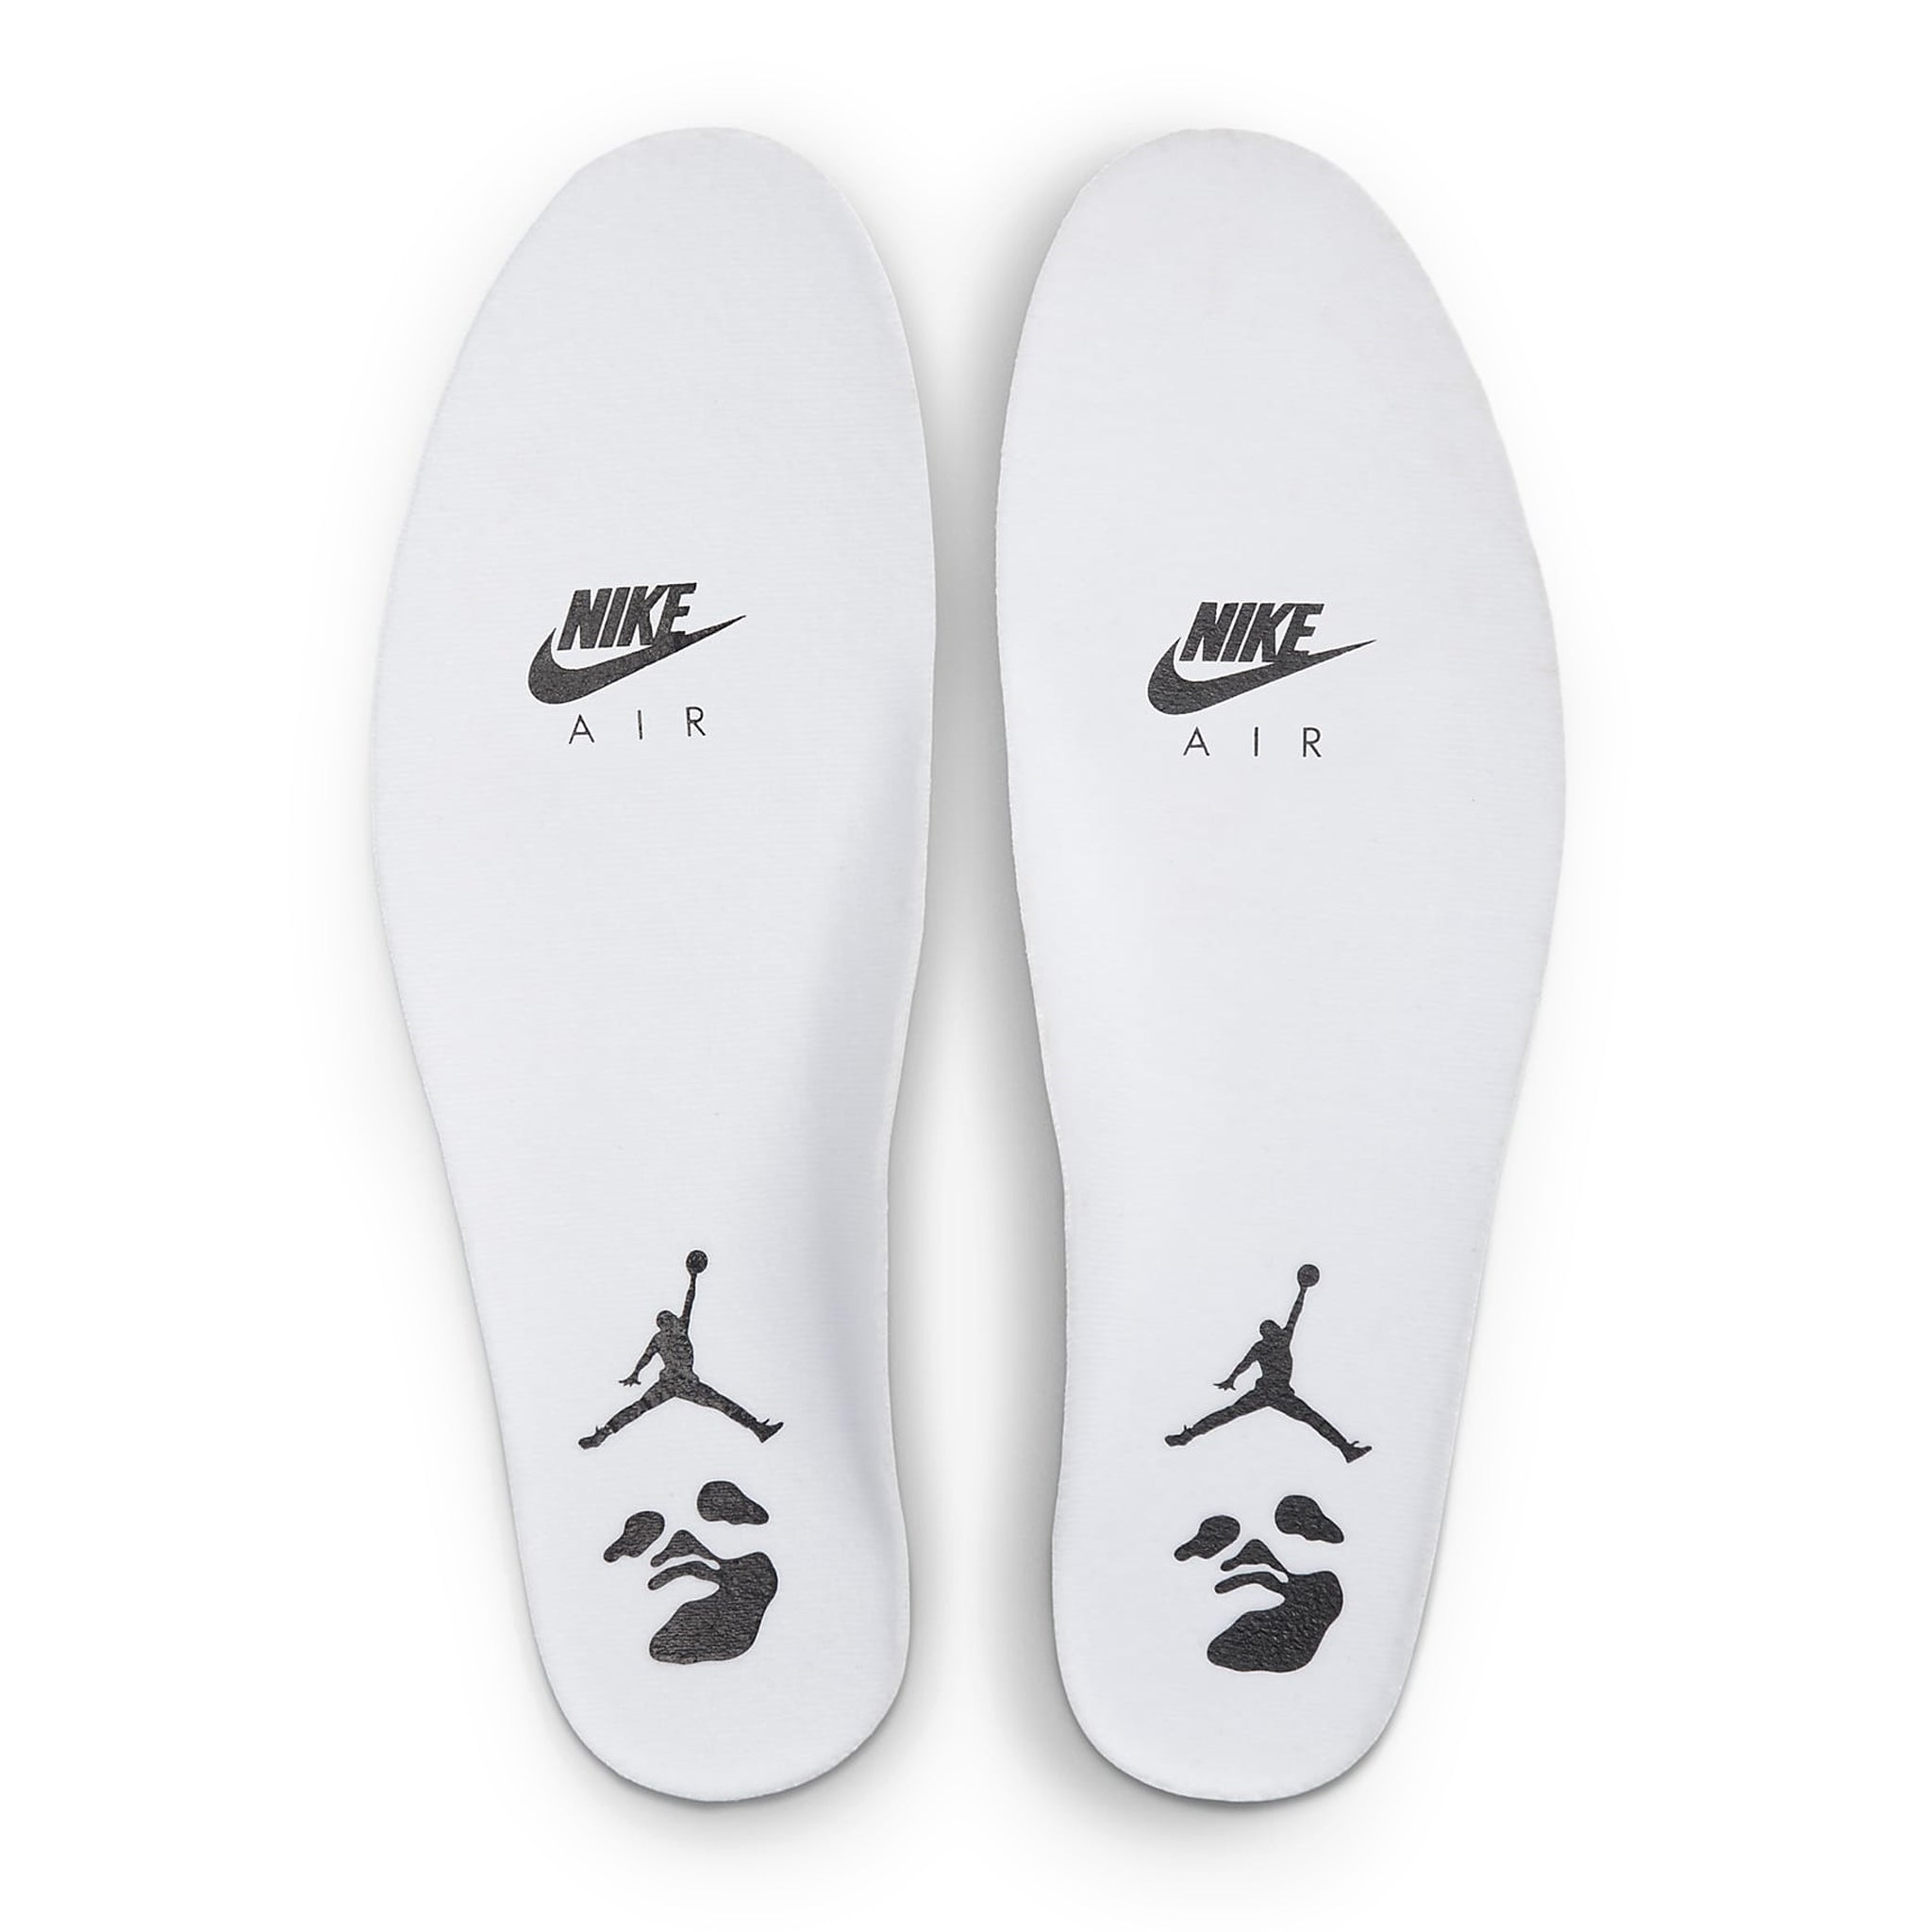 Insole view of Air Jordan 2 X Off-White Retro Low White Varsity Red DJ4375-106